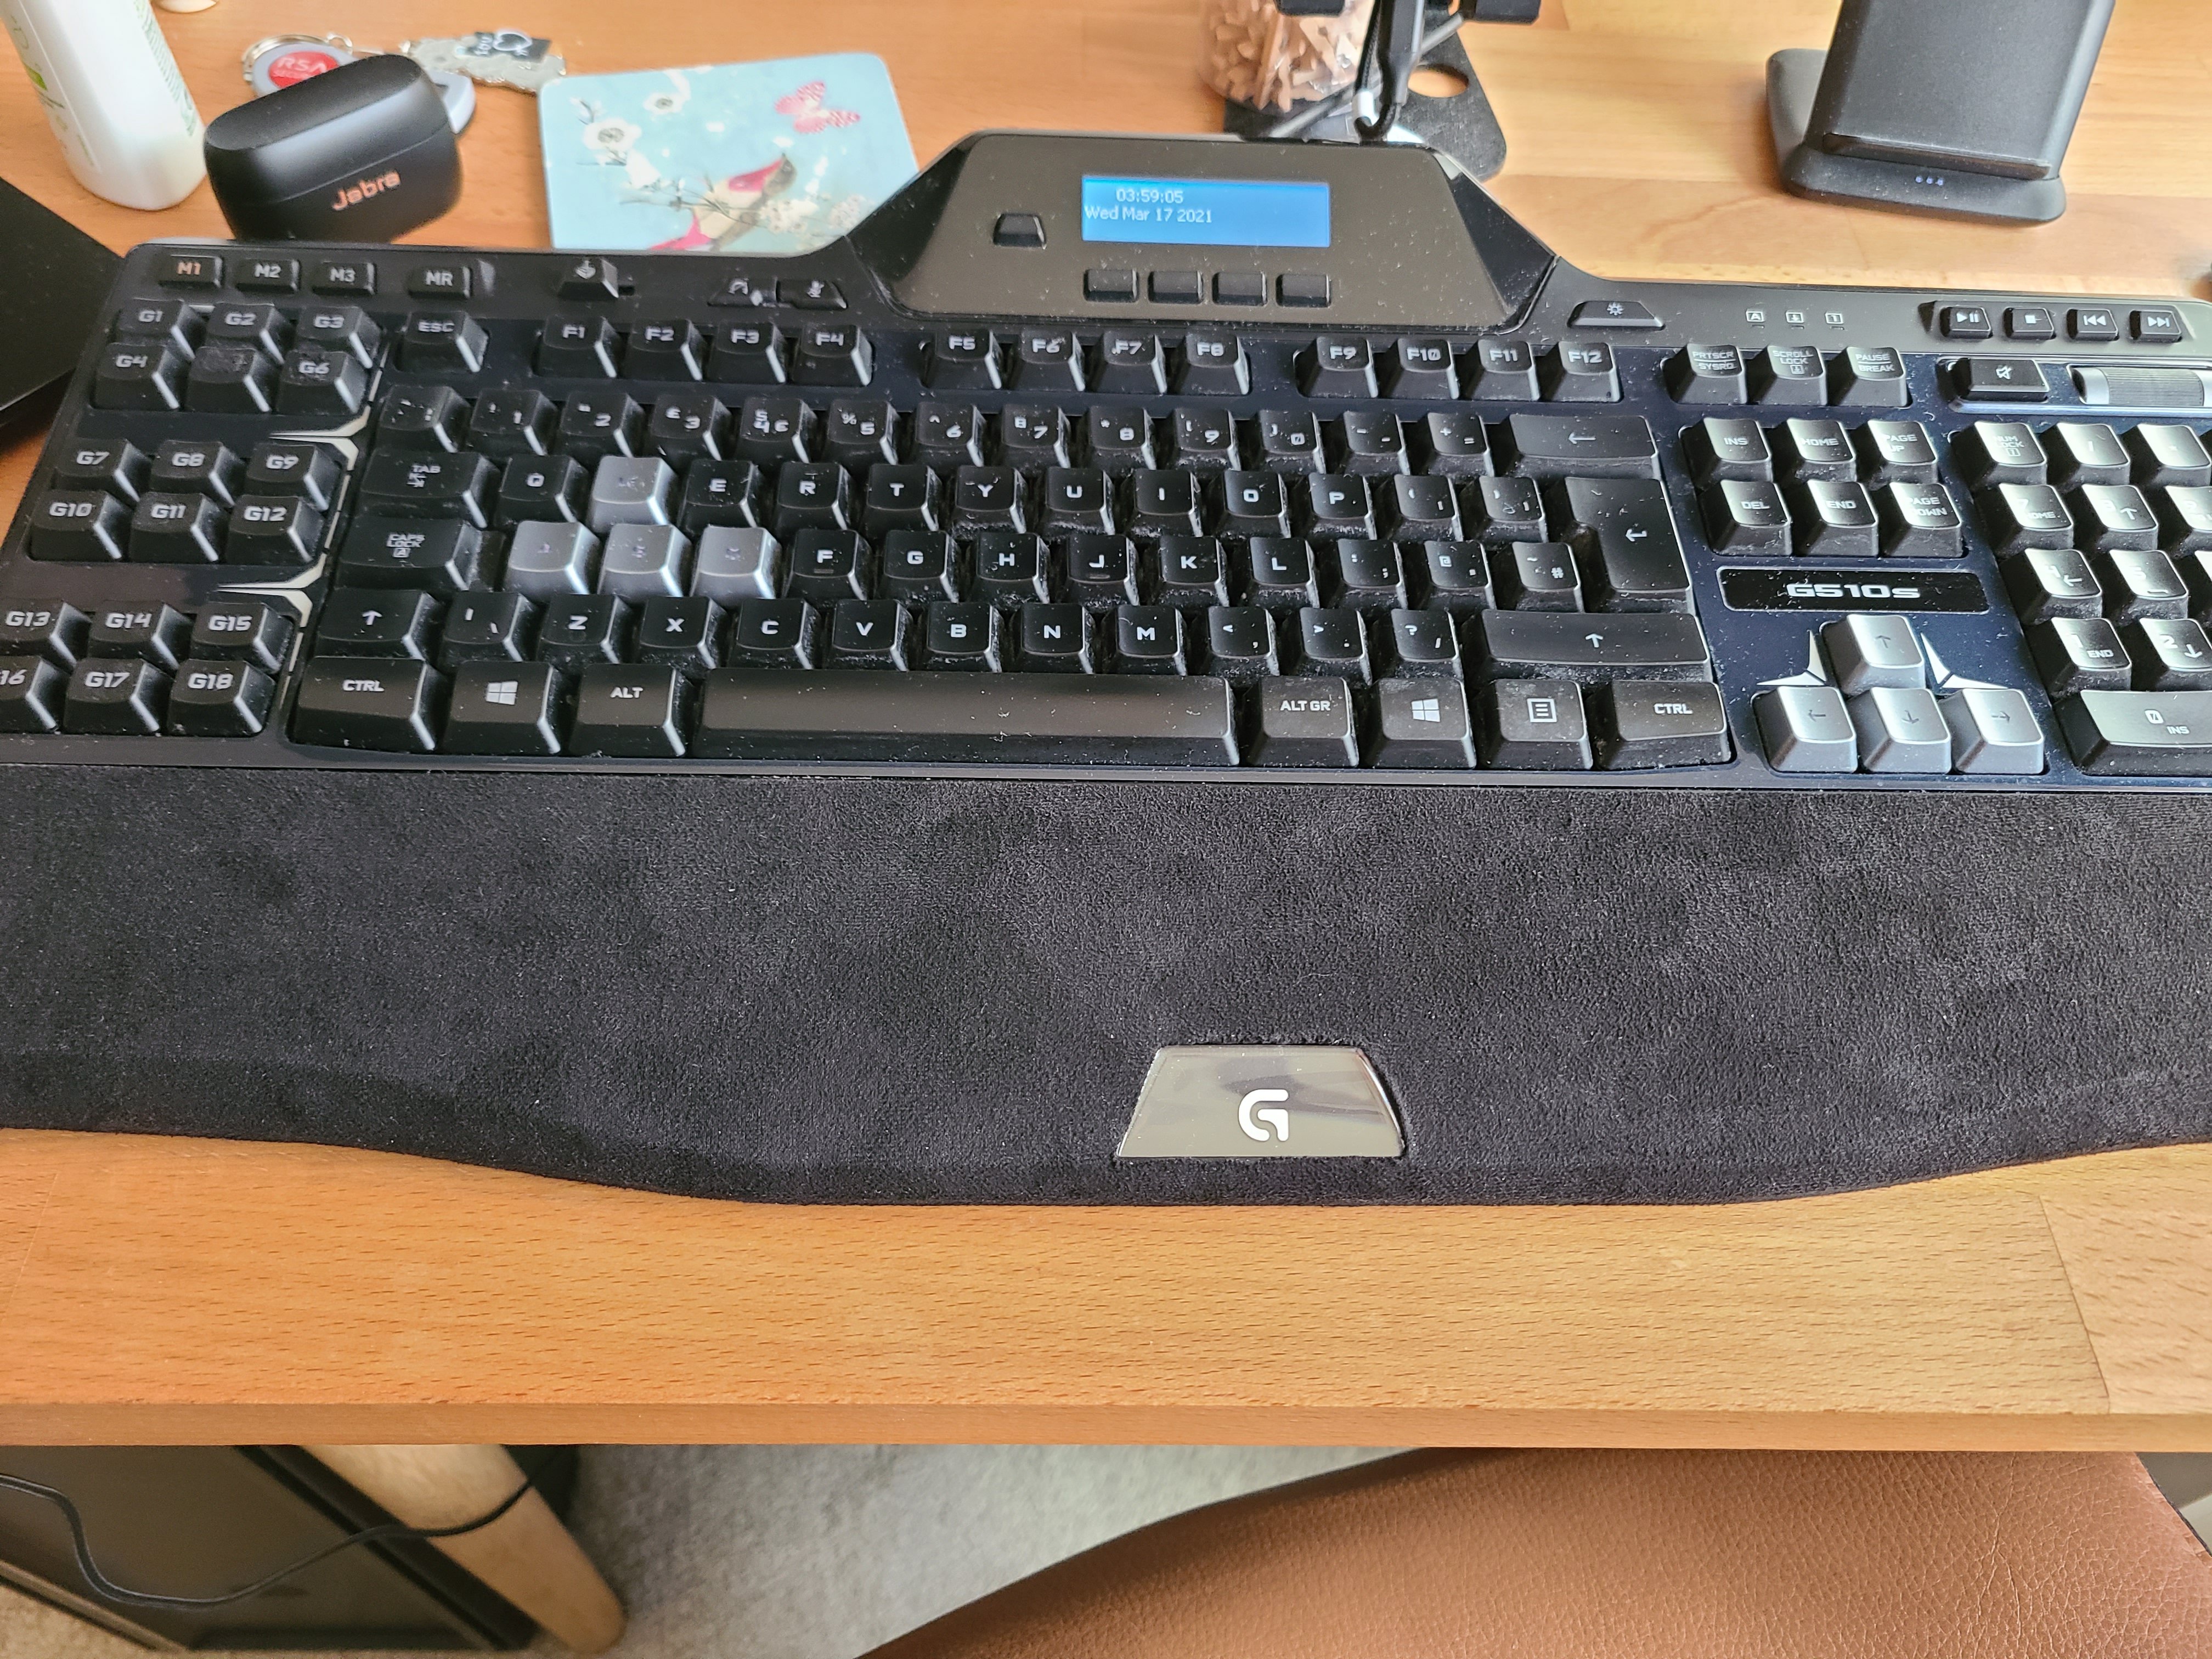 Giang Nguyen on Twitter: "@LogitechGUK I modded my G510 keyboard with lush  alcantara and my 6 year old keyboard now feels exquisite. What do you  think? #Logitech #G510 #alcantara #keyboard #mod https://t.co/5kdx7zZzBS" /